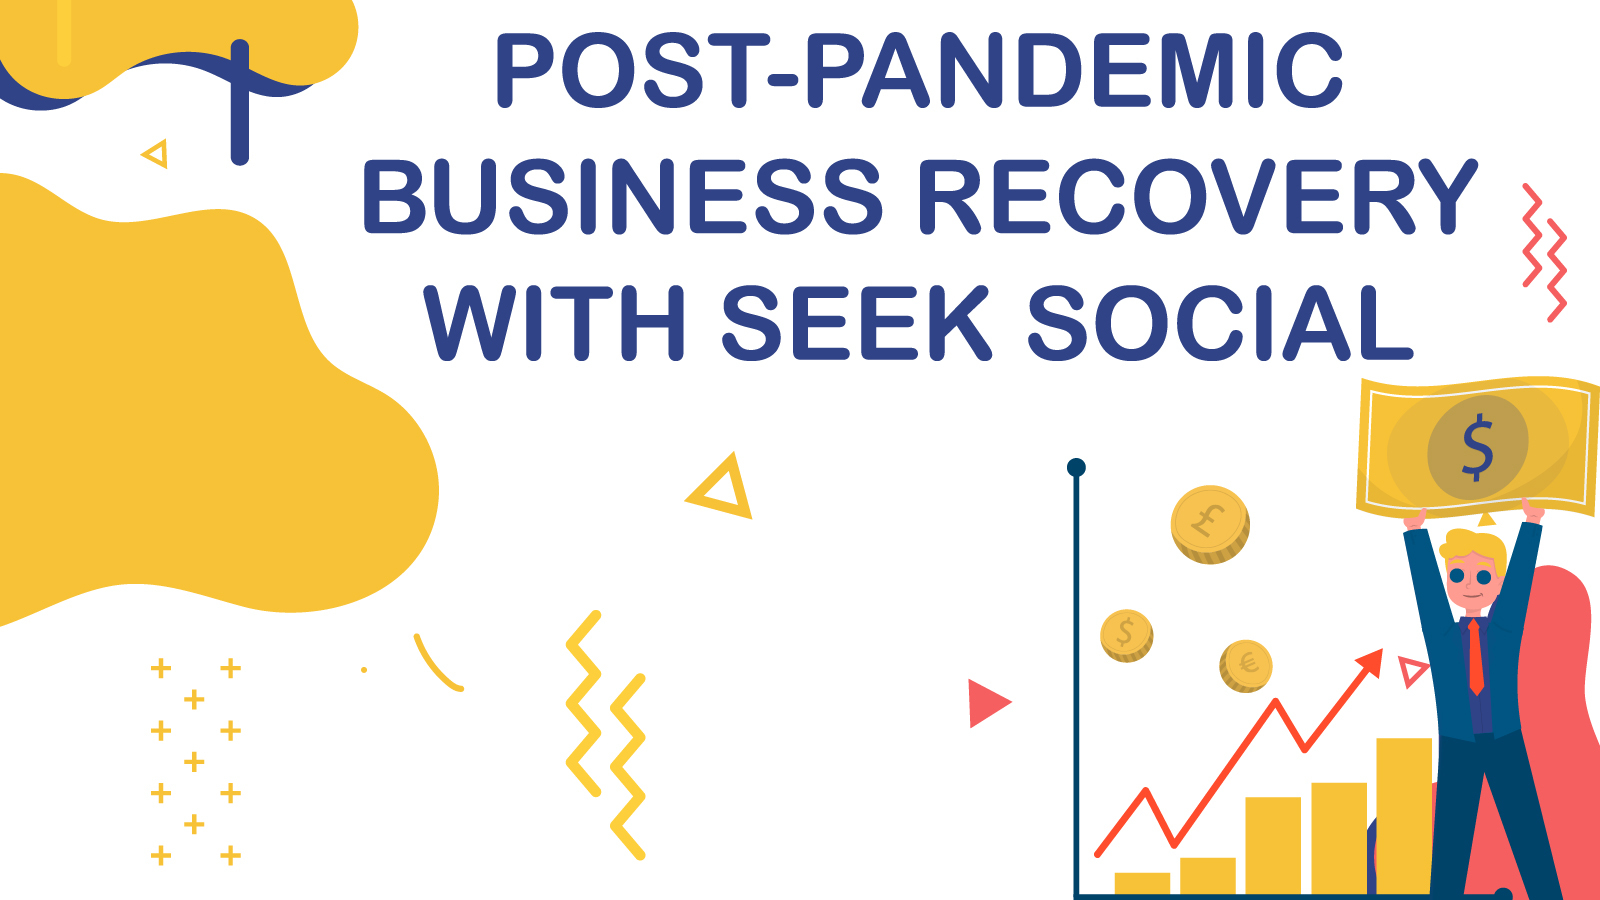 Blue text reading 'Post Pandemic Business Recovery With Seek Social' against a white and yellow background, above an illustration of a man in a suit holding aloft a large banknote